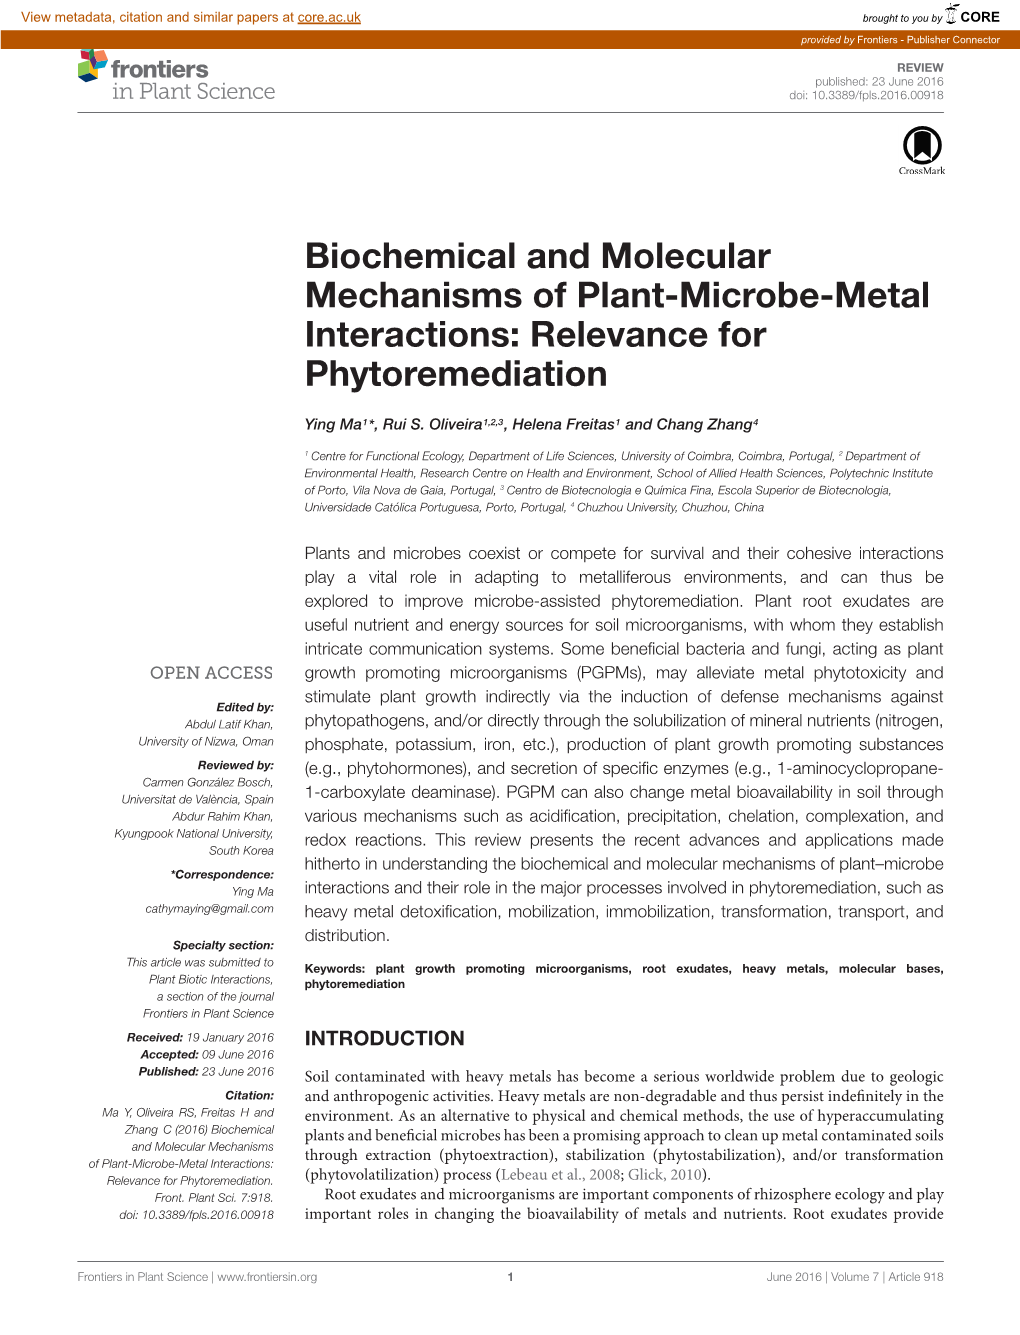 Biochemical and Molecular Mechanisms of Plant-Microbe-Metal Interactions: Relevance for Phytoremediation